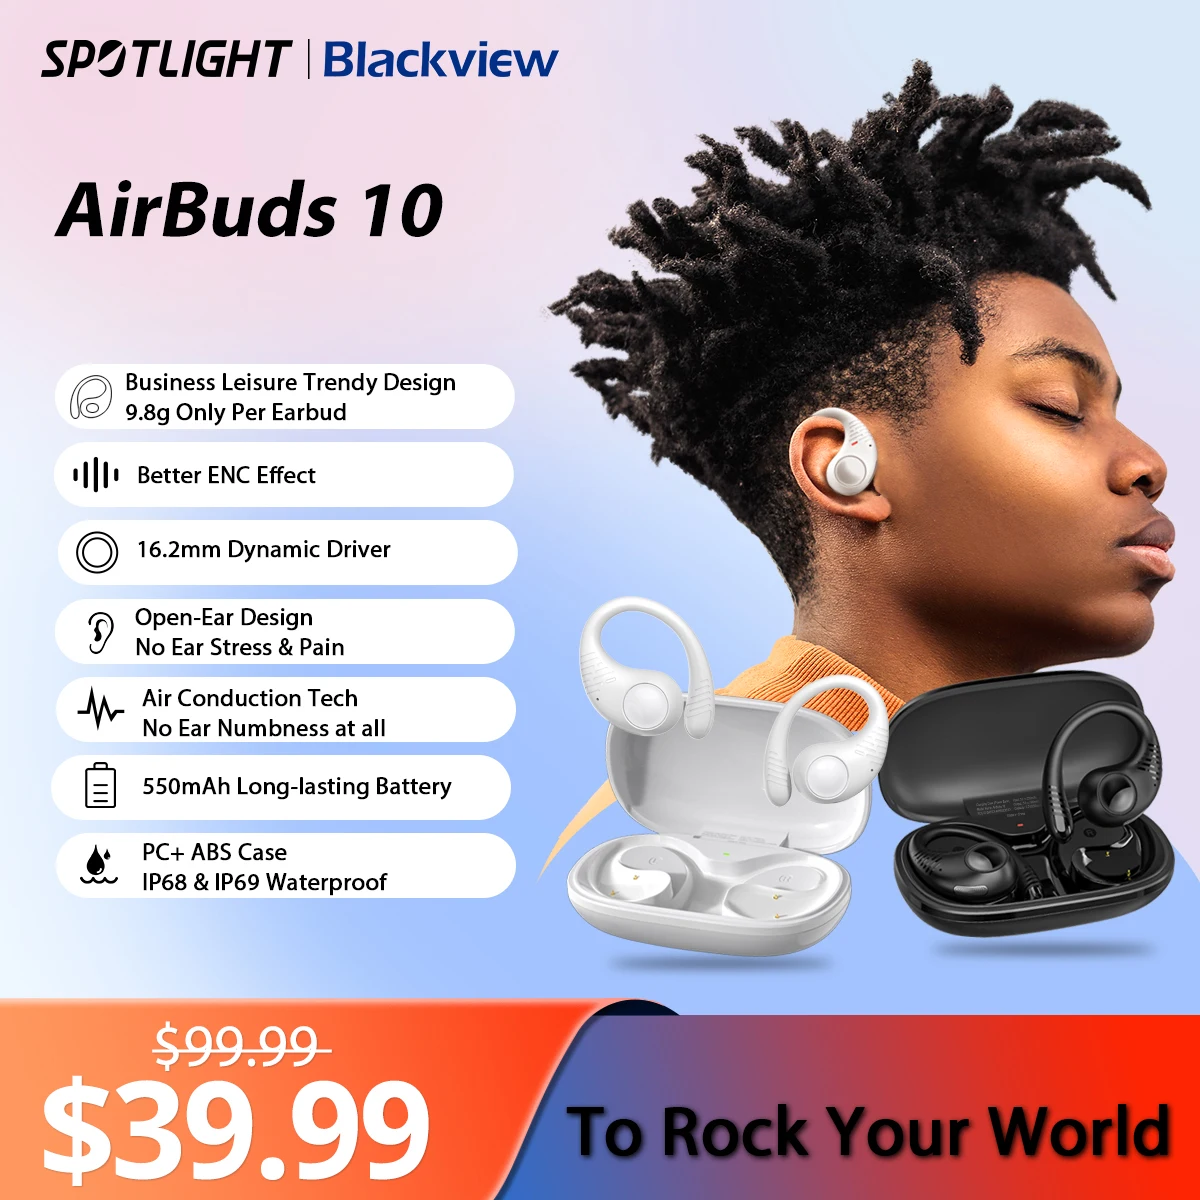 Blackview Airbuds 10 AirBuds 10 Pro Open Ear Headset Wireless Headphones Sports Air Conduction Bass ENC Earphones TWS With Mic